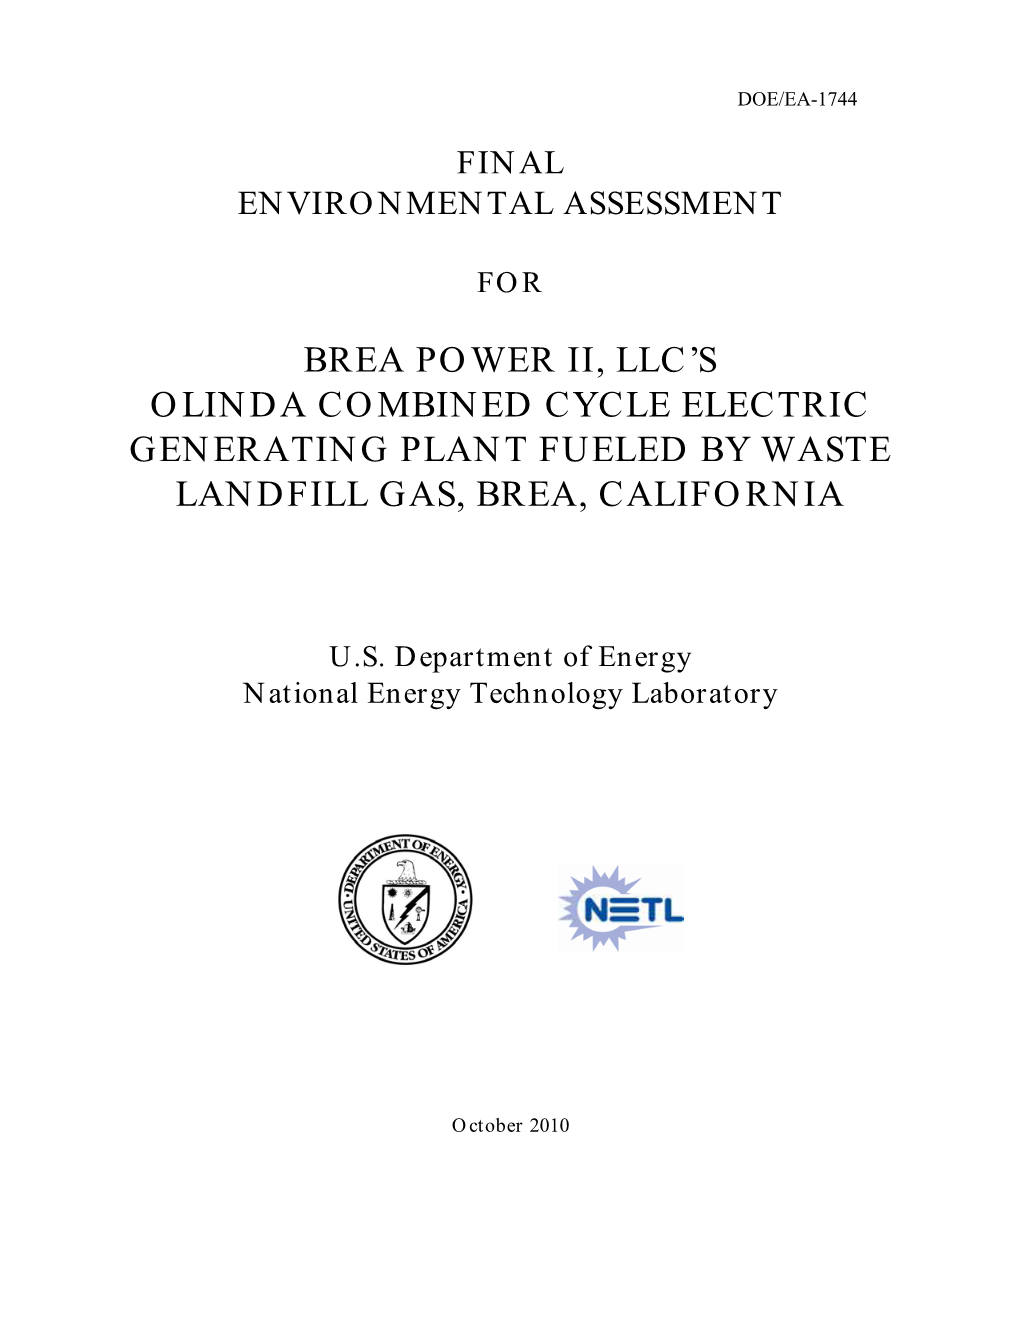 Brea Power Ii, Llc's Olinda Combined Cycle Electric Generating Plant Fueled by Waste Landfill Gas, Brea, California